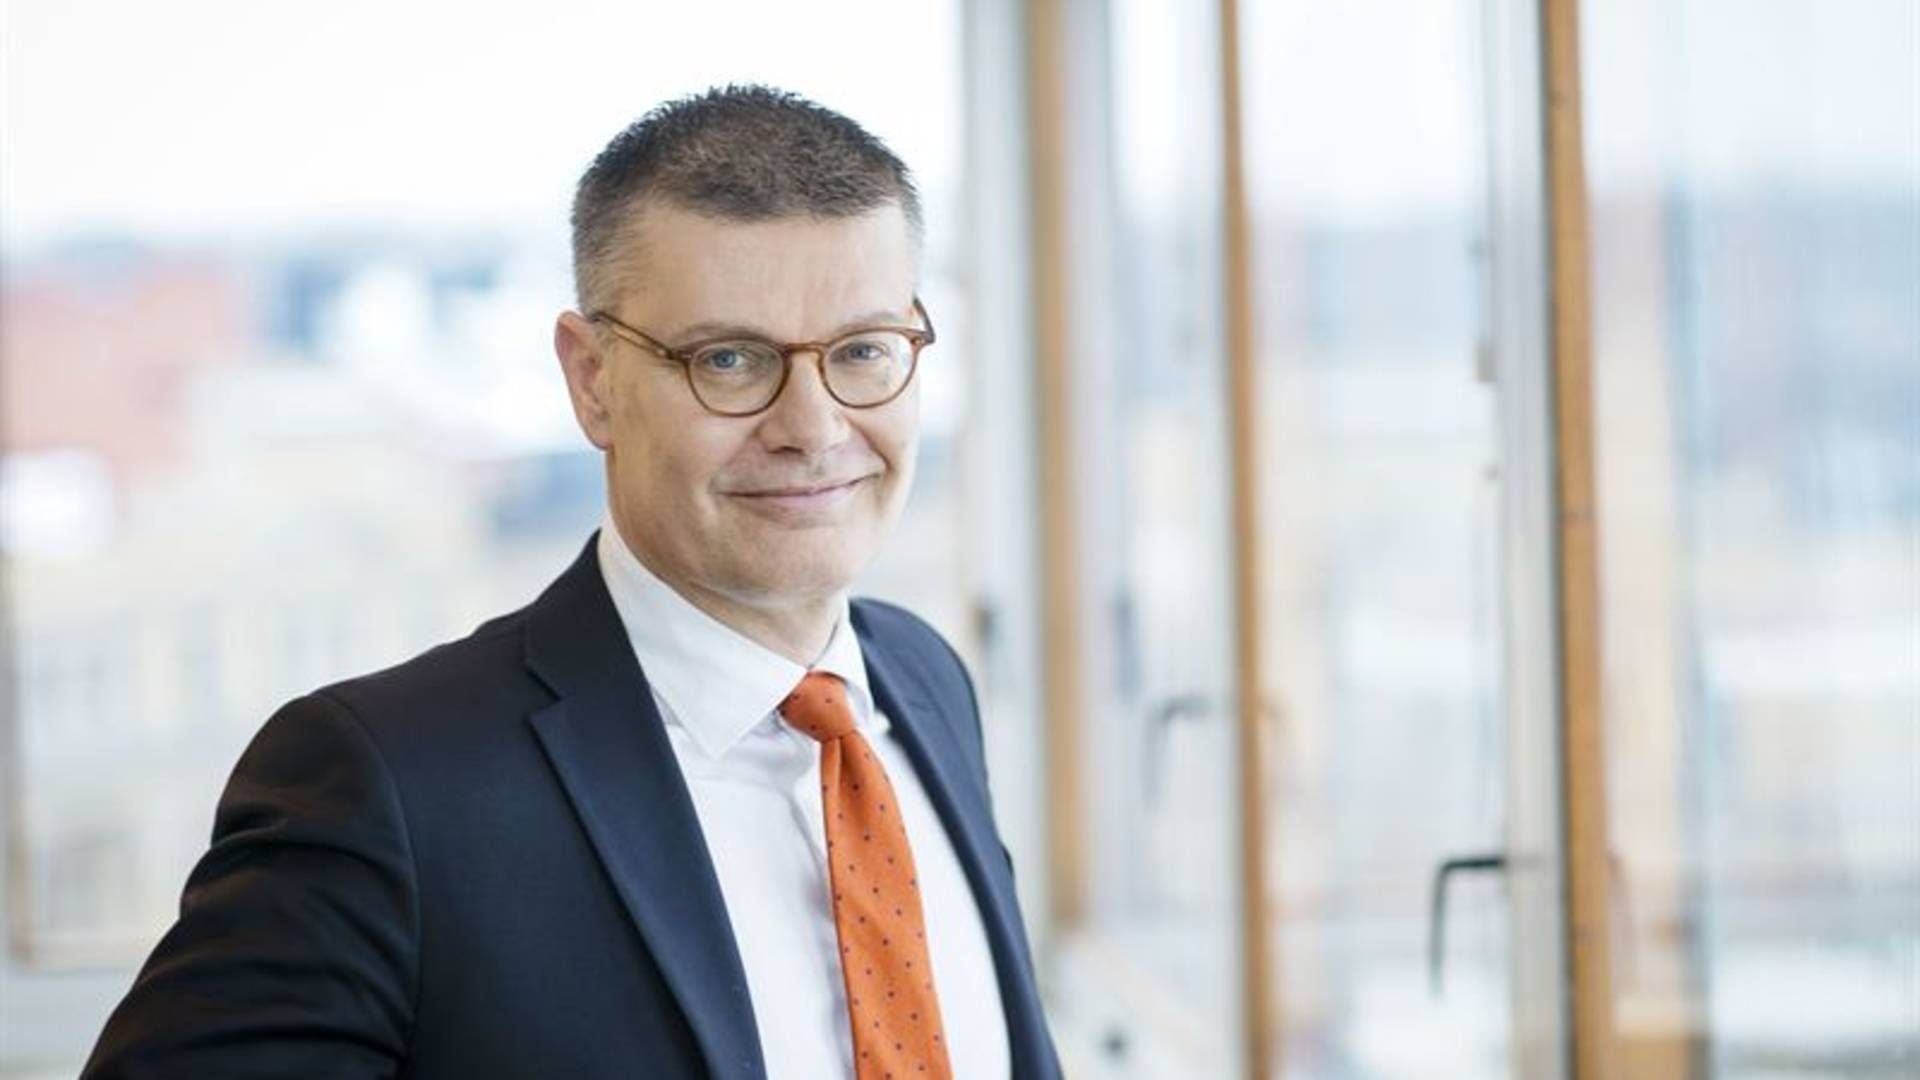 Jan Sasse is joining the fundraising boutique dedicated to alternative investments after having served as CEO of Tesi. | Photo: PR Tesi